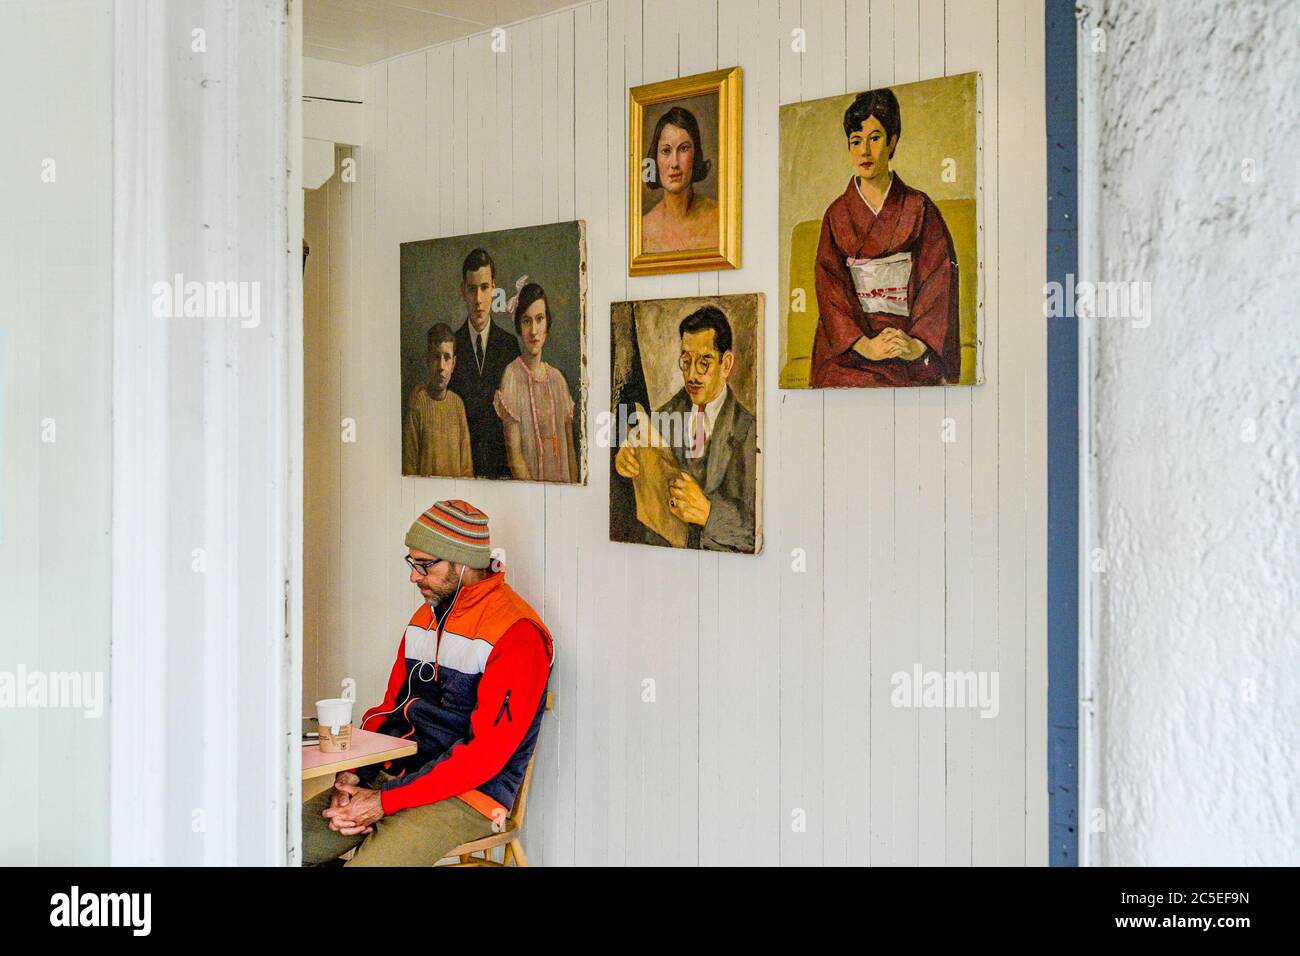 Portrait of man in coffee shop beside  portraits, Main Street, Vancouver, British Columbia, Canada Stock Photo